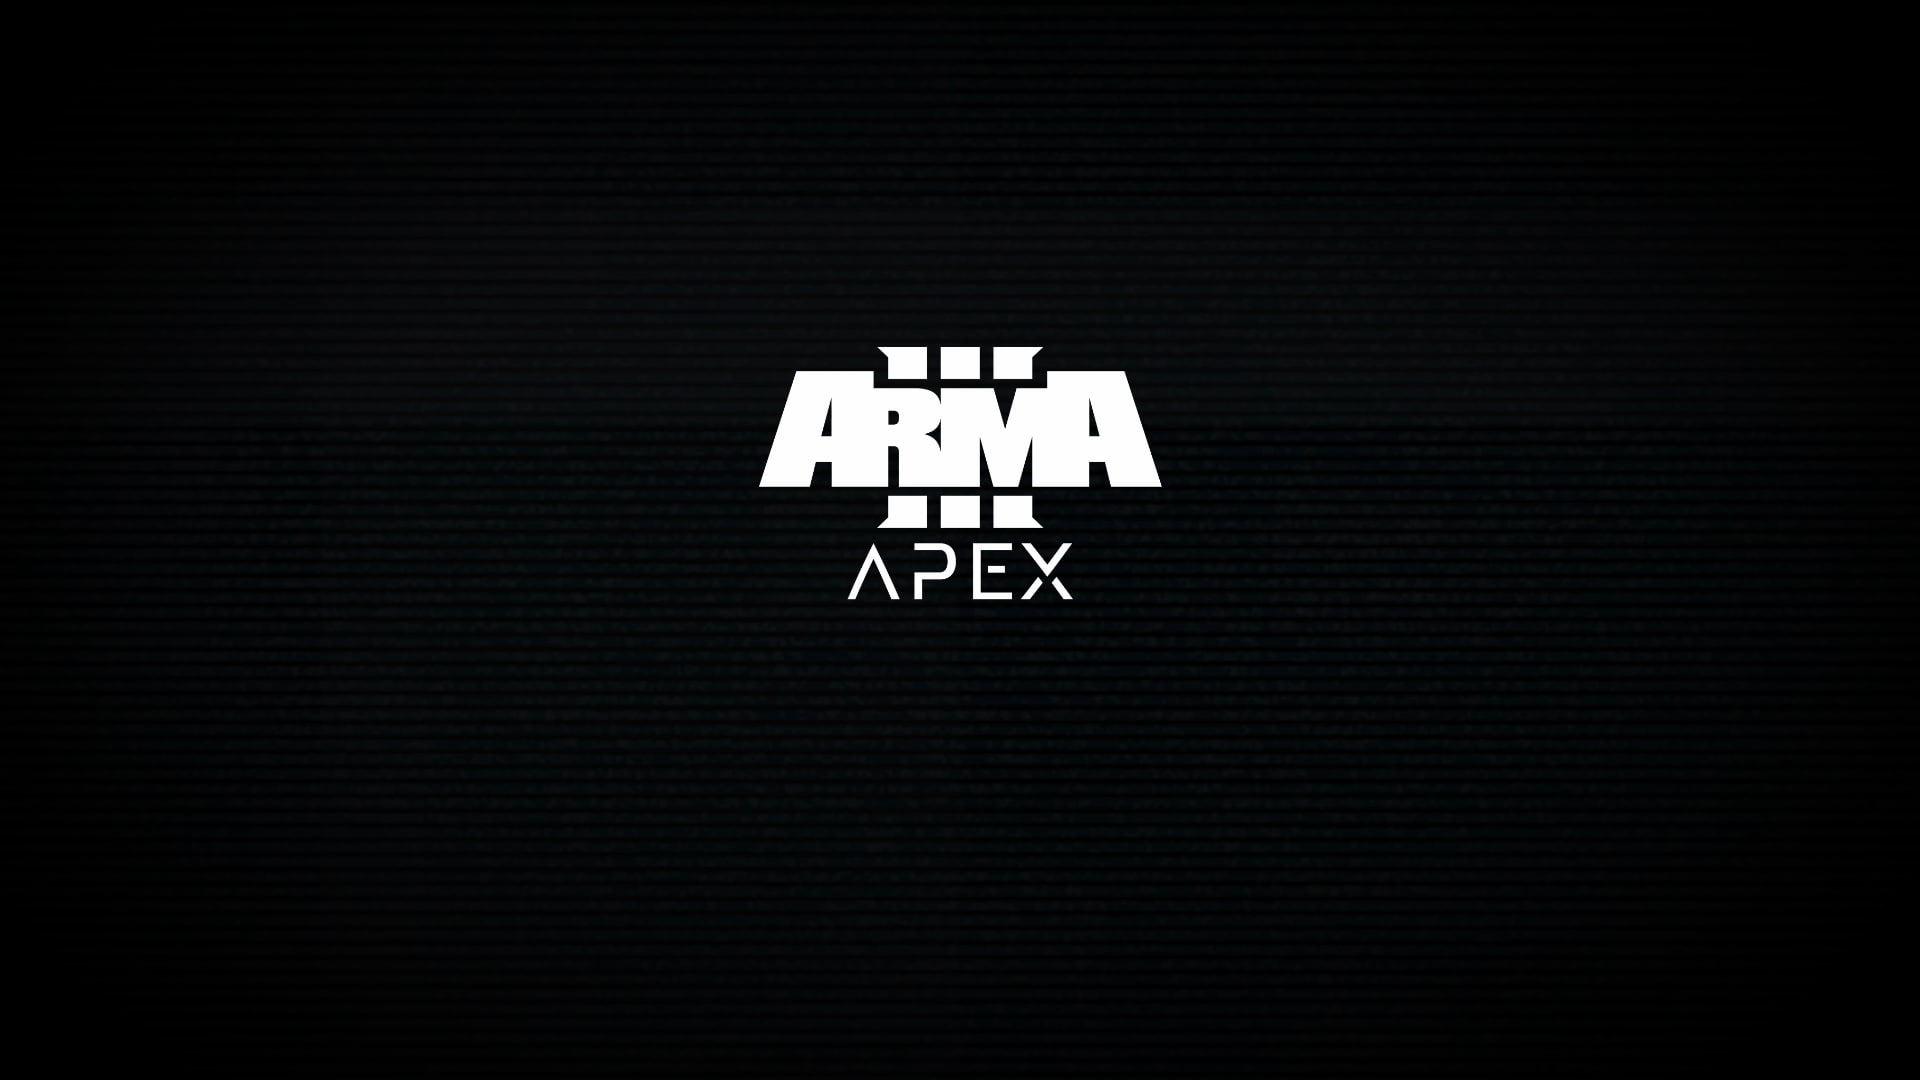 Arma 3, video games, text, western script, communication, indoors